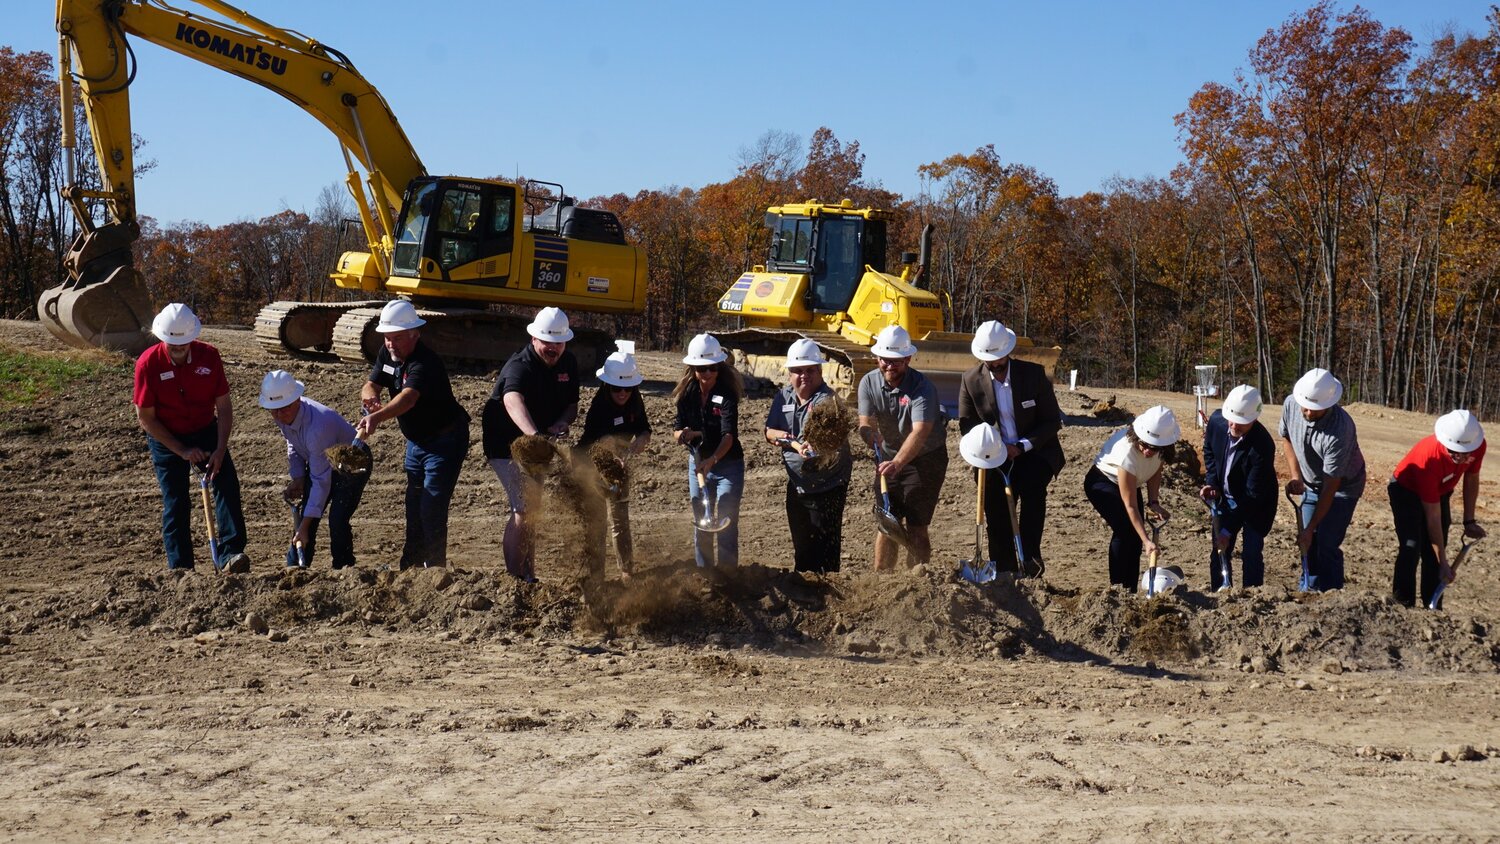 Stakeholders break ground during a ceremony on Nov. 7.